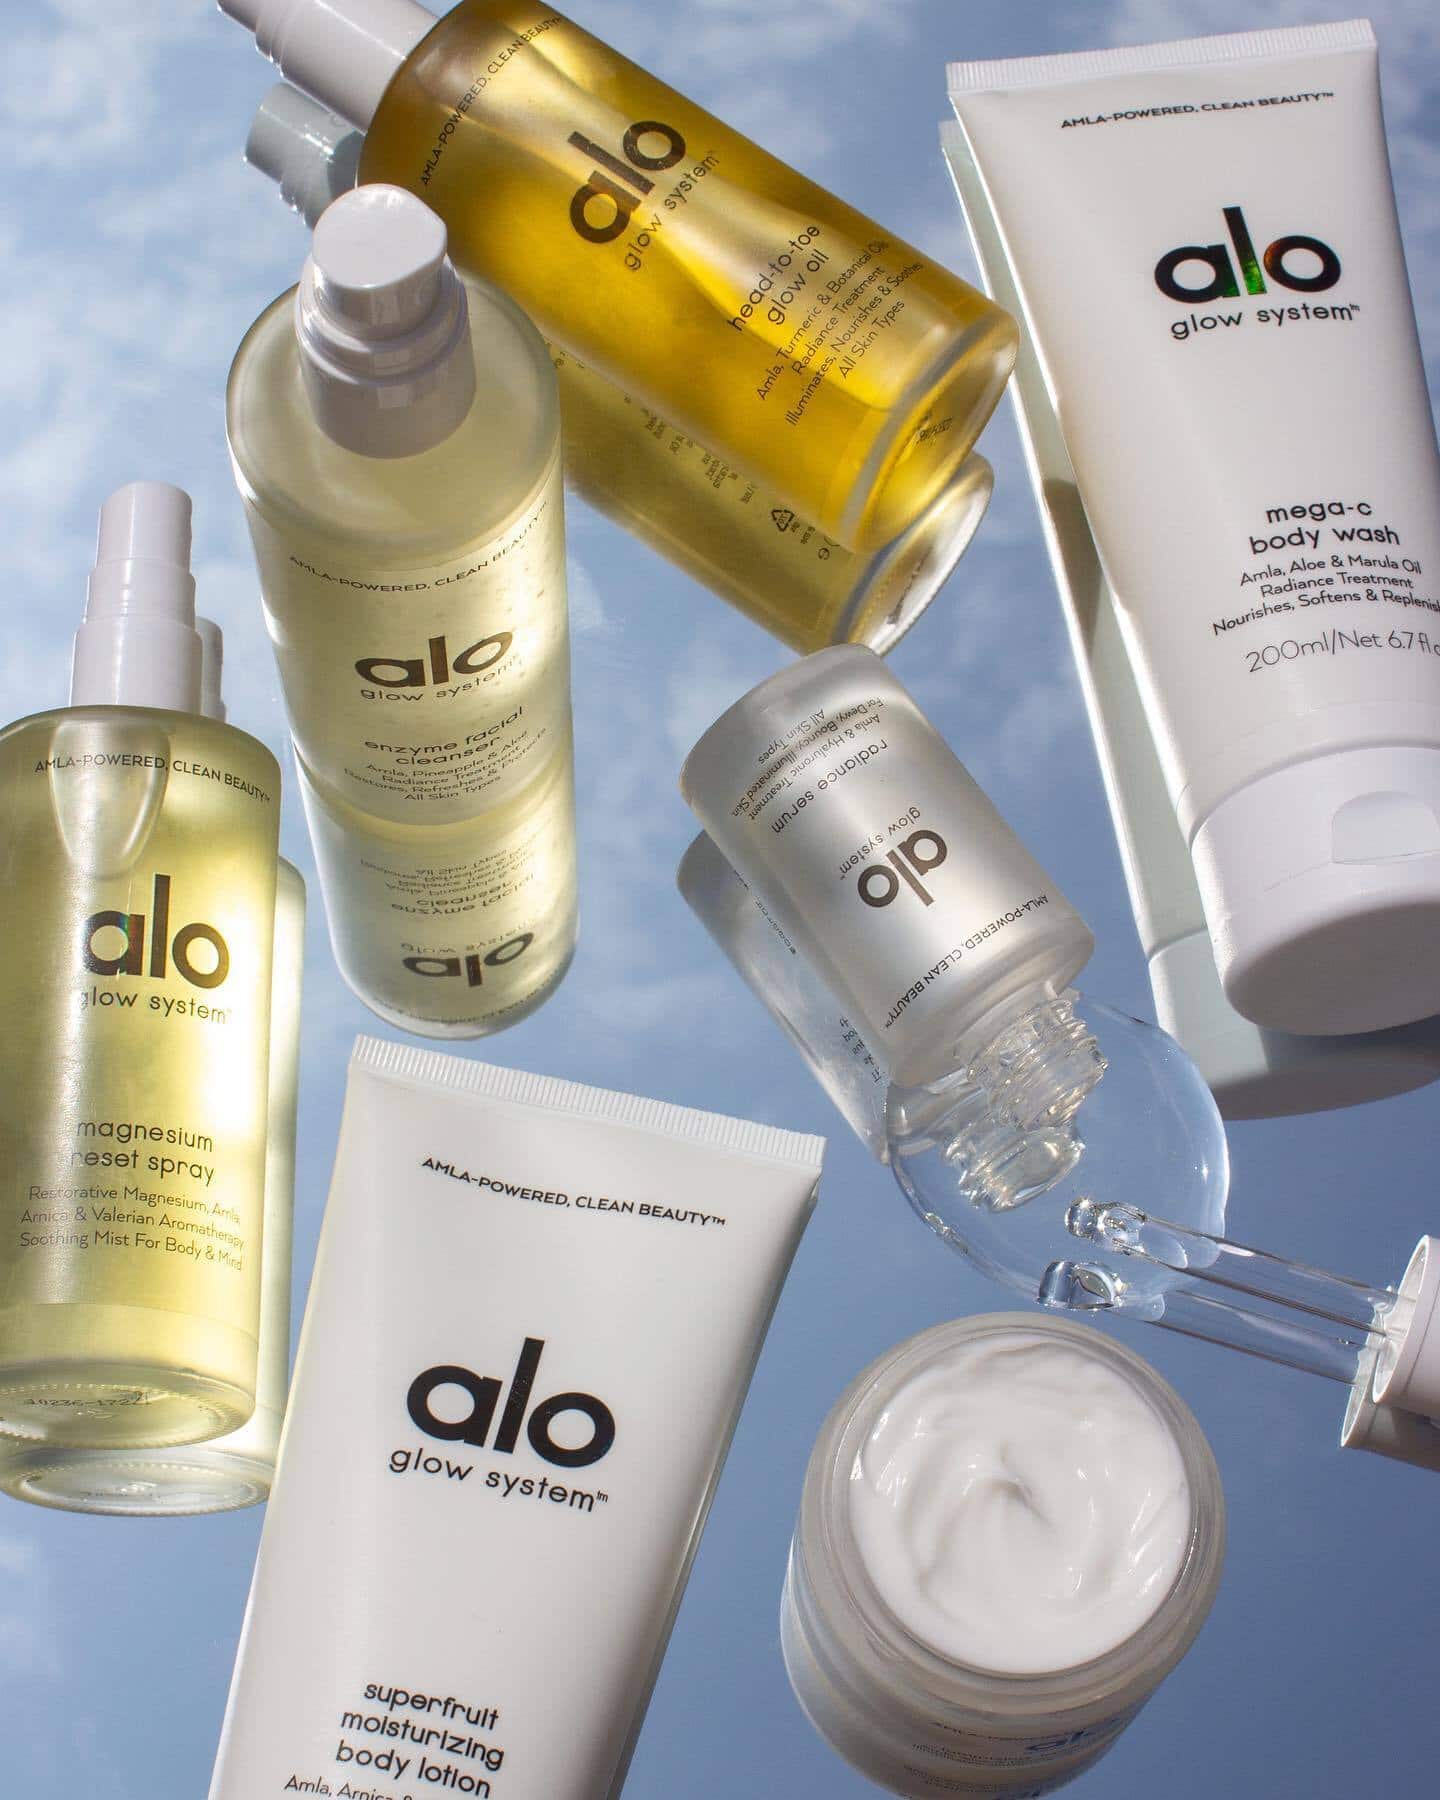 Flat mirror lay of Alo Glow System products, cream opened, and bottles tipped over. 